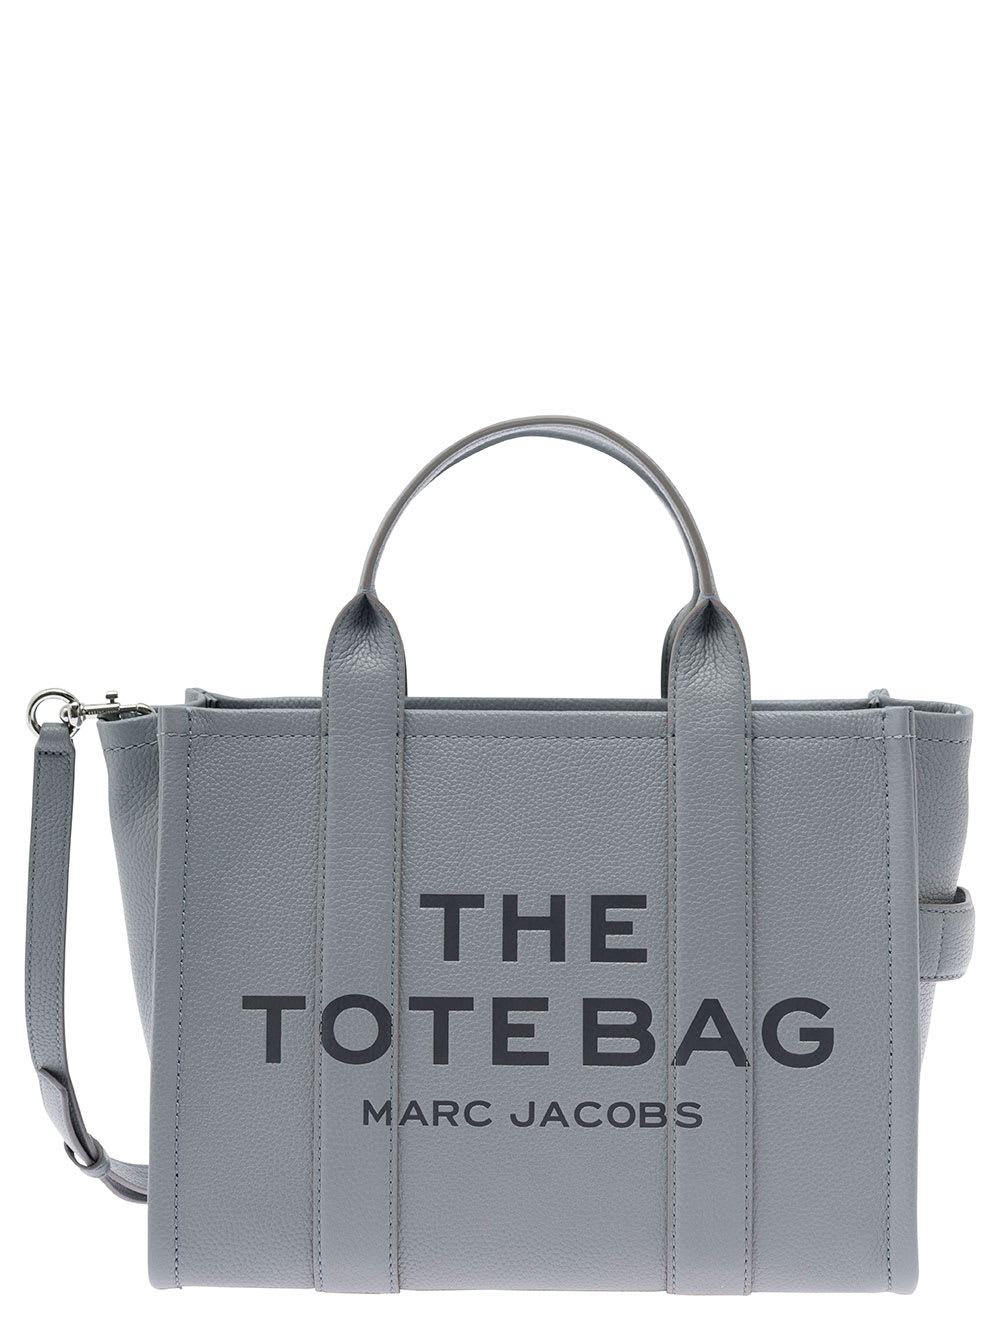 Shop Marc Jacobs The Medium Tote Bag Grey Shoulder Bag With Logo In Grainy Leather Woman